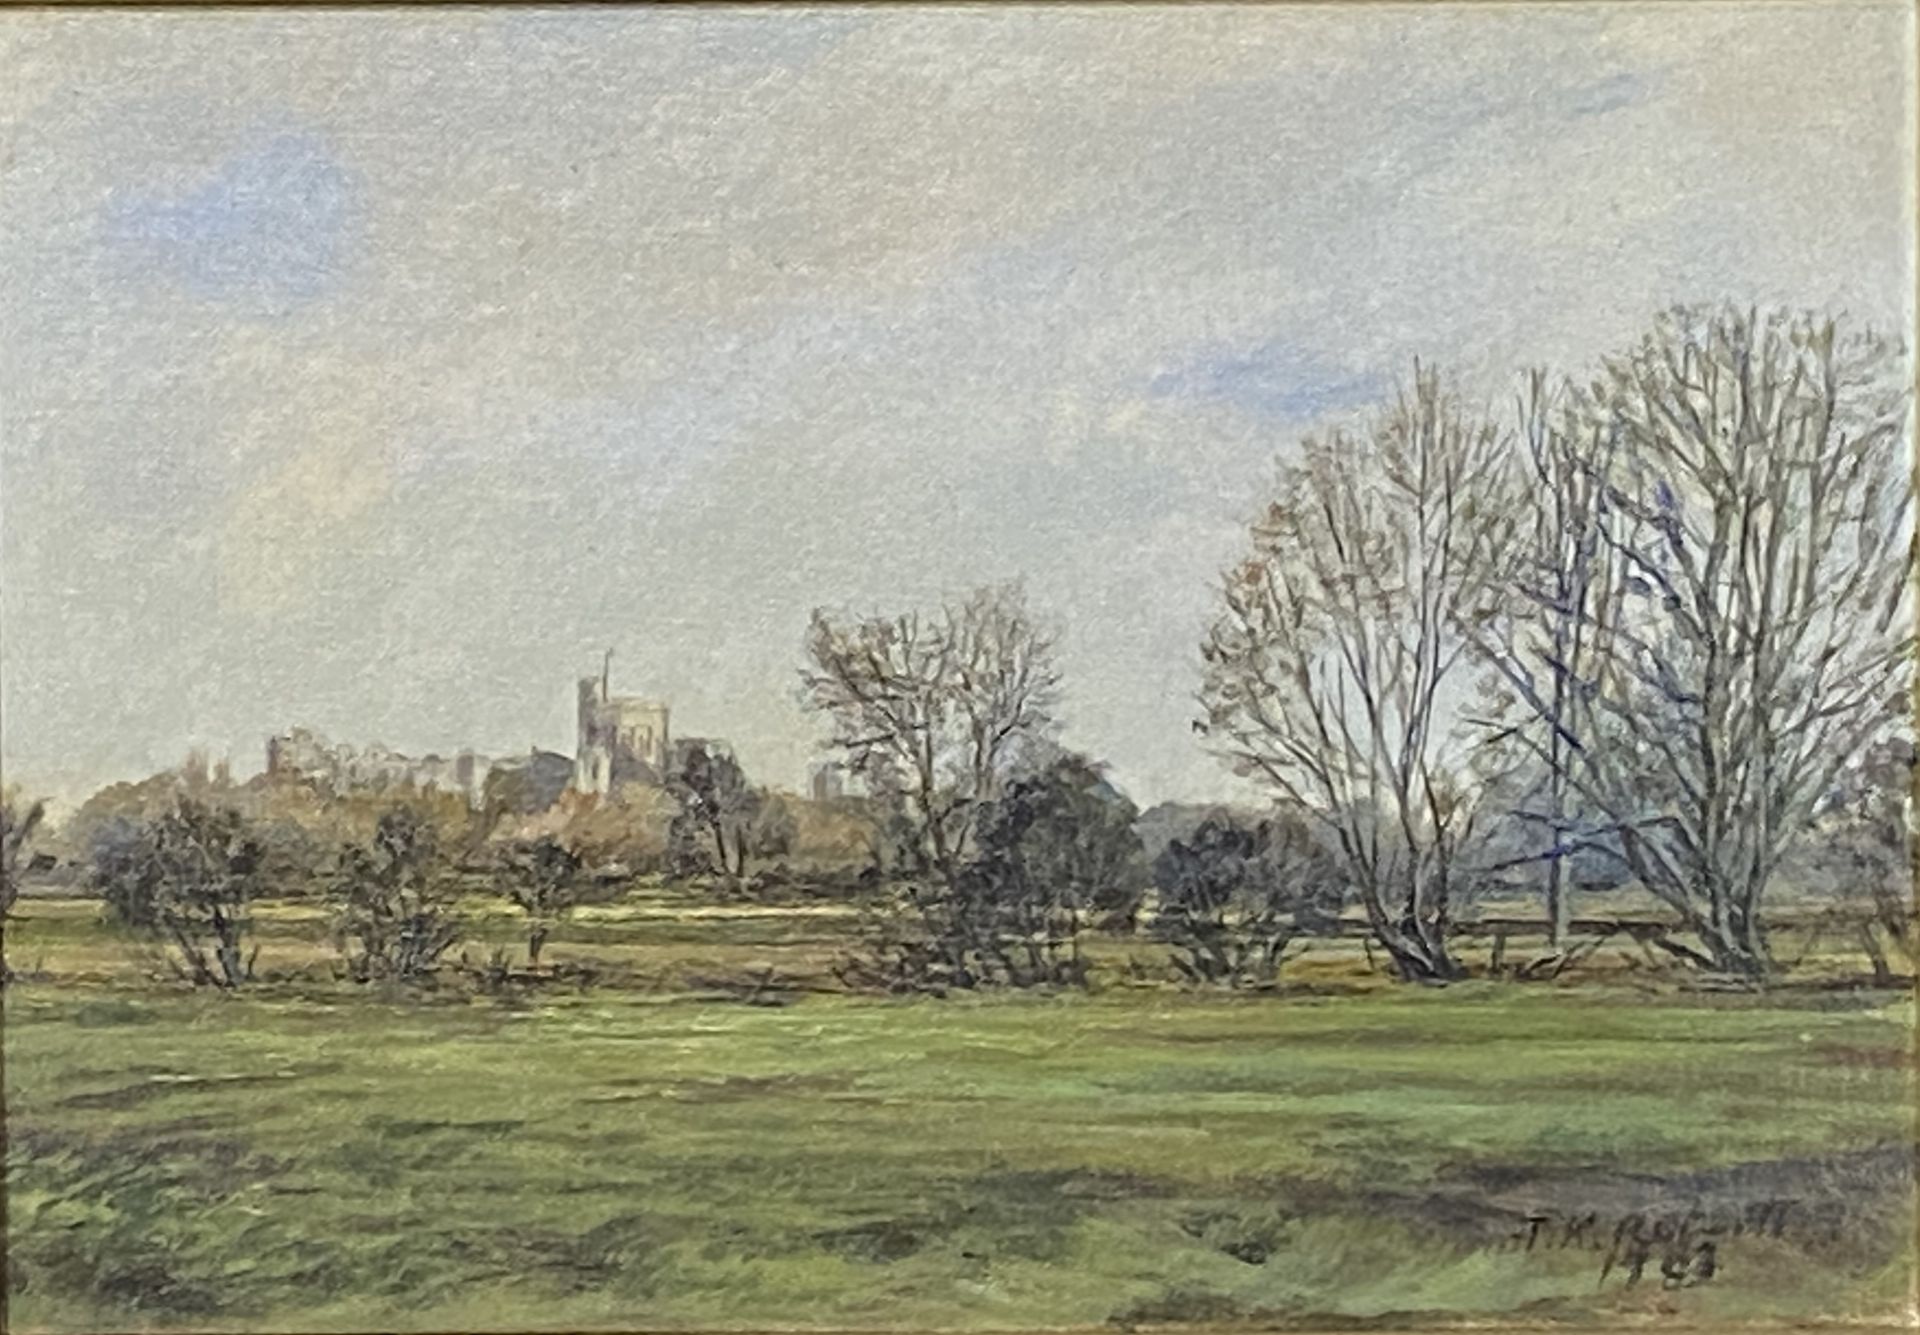 Framed and glazed oil on canvas signed T K Roberts, 1983, with a view of Windsor Castle